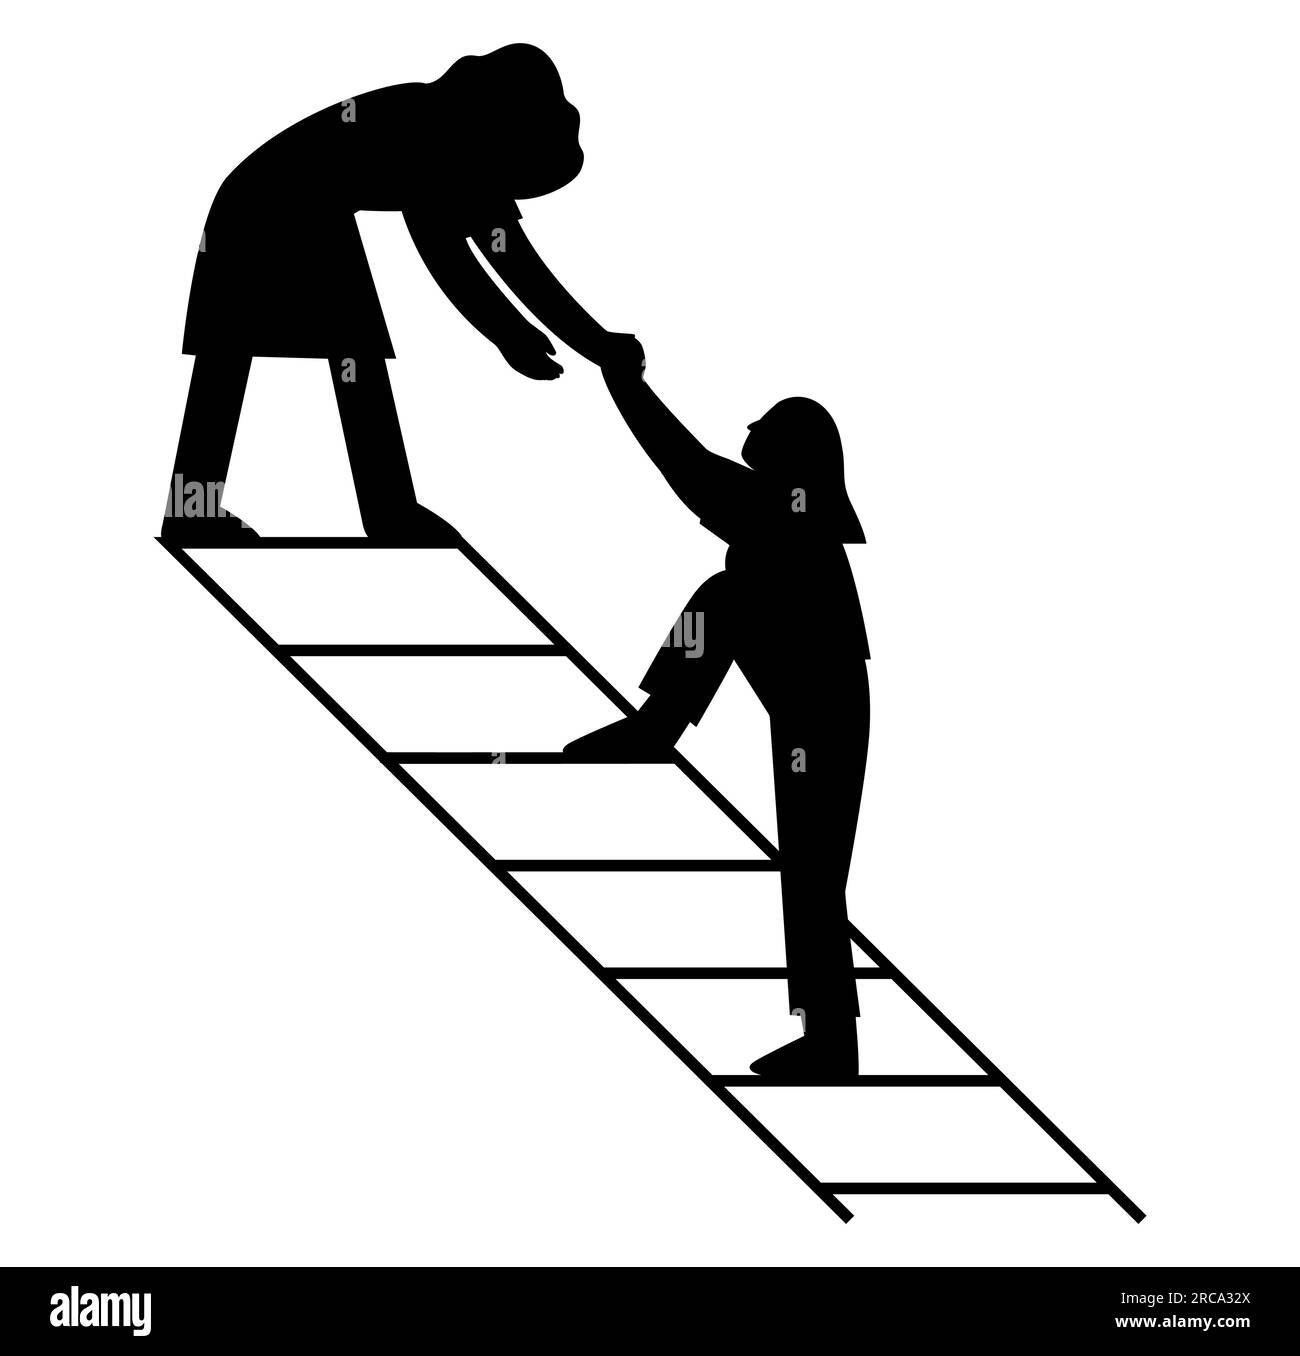 Black silhouette of two businesswomen helping each other on the ladder of success, teamwork, career goal, vector illustration isolated on white Stock Vector